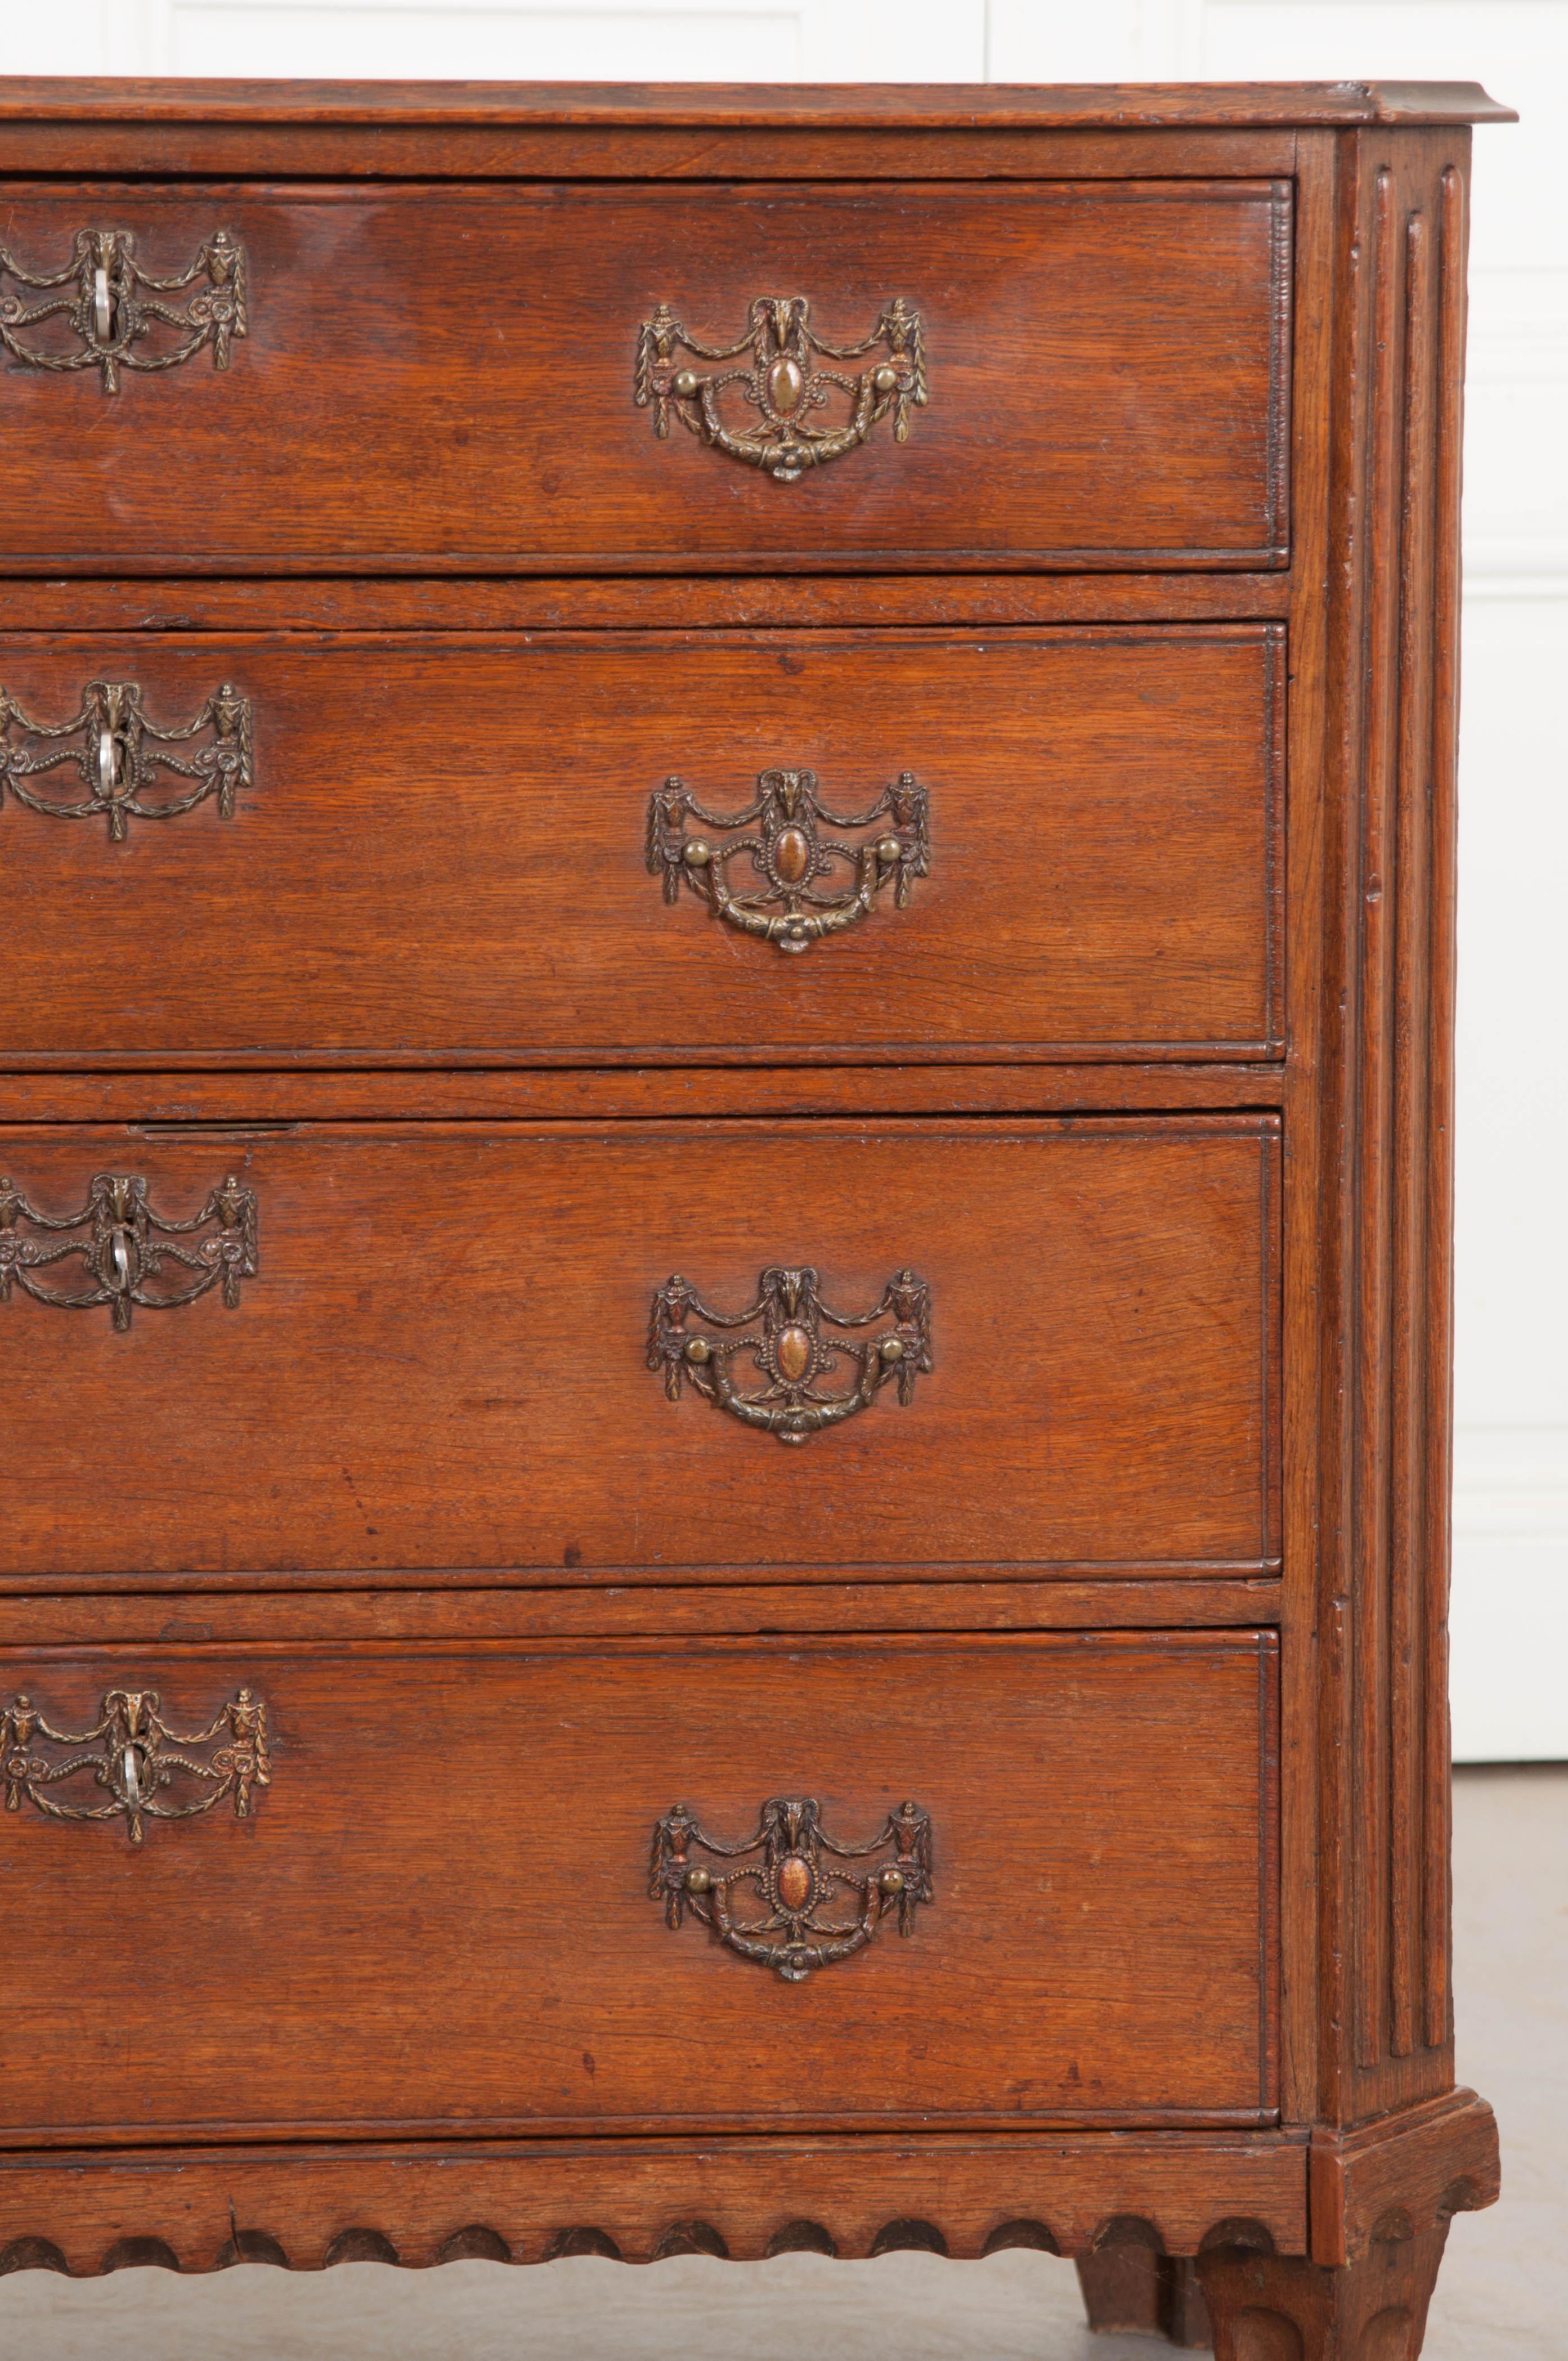 This Jacobean oak chest of drawers is from 1780's England, and features a conforming top over canted and reeded corners. It has four long drawers each with a different lock and beautifully detailed drawer pulls, over a charming scallop-carved apron